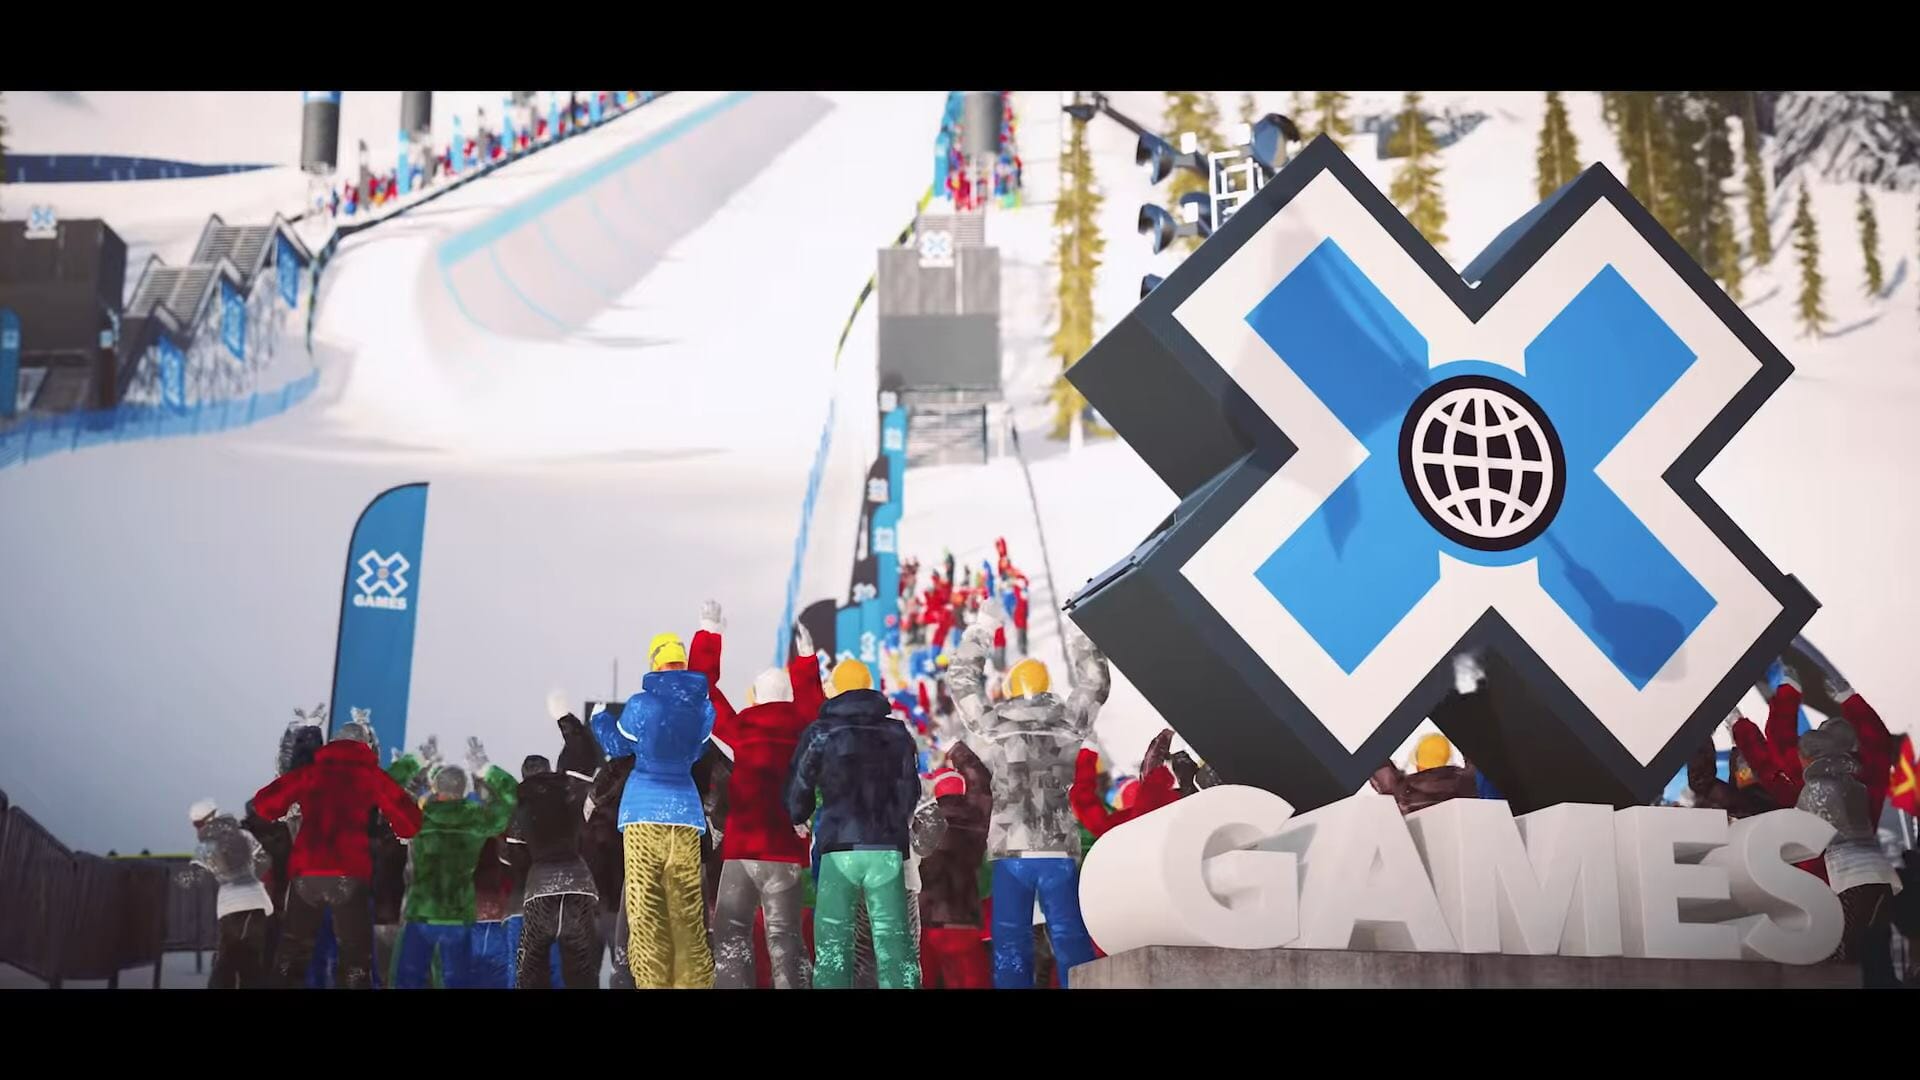 Steep x games Gold Edition. X games. Start Arch x games. X games сайт